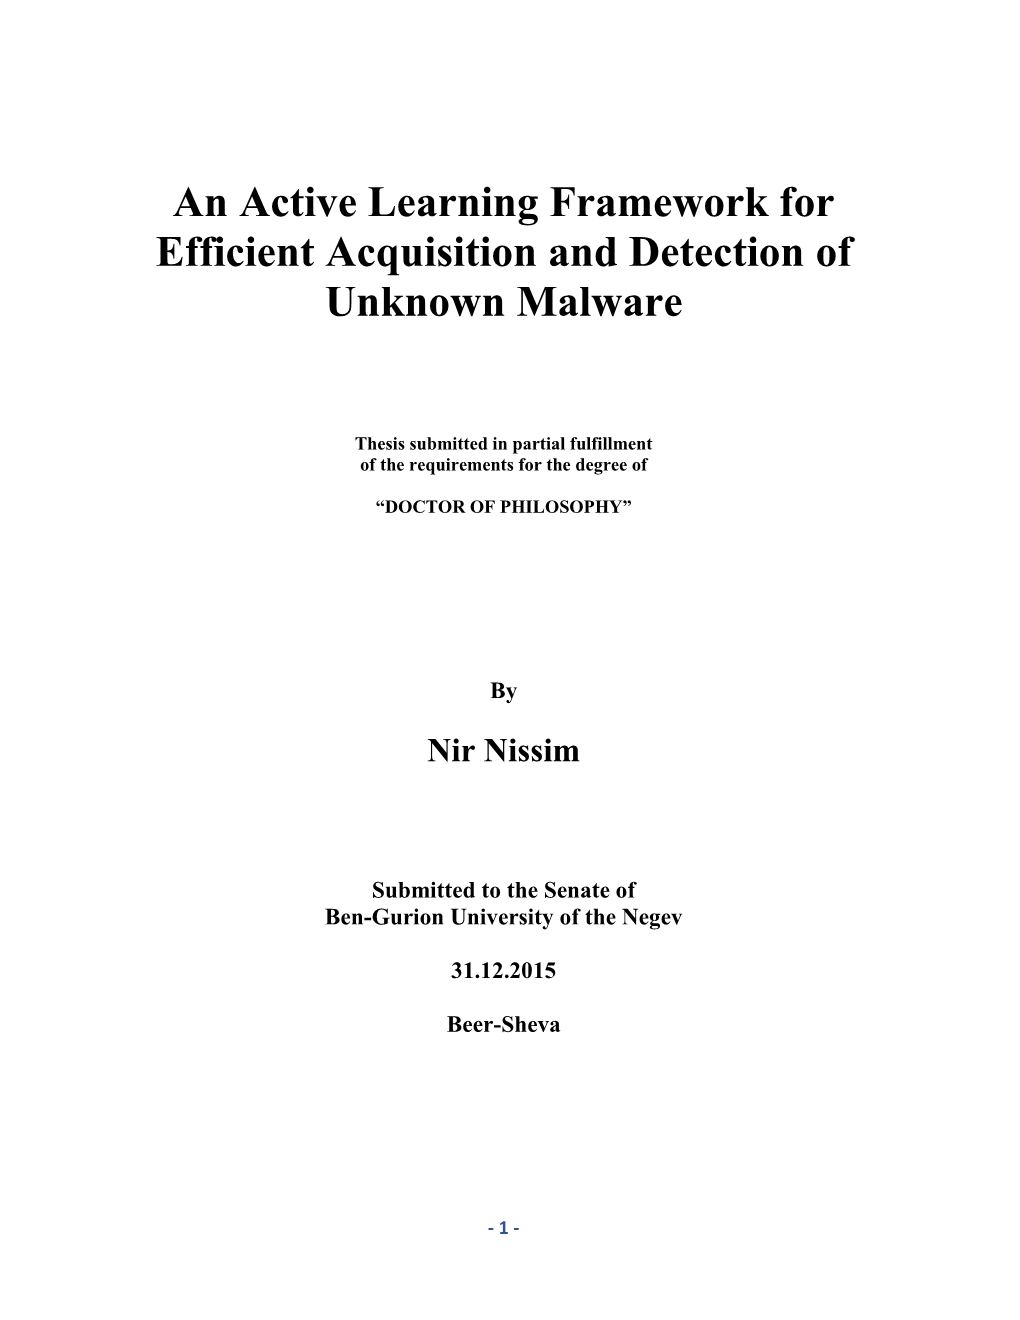 An Active Learning Framework for Efficient Acquisition and Detection of Unknown Malware